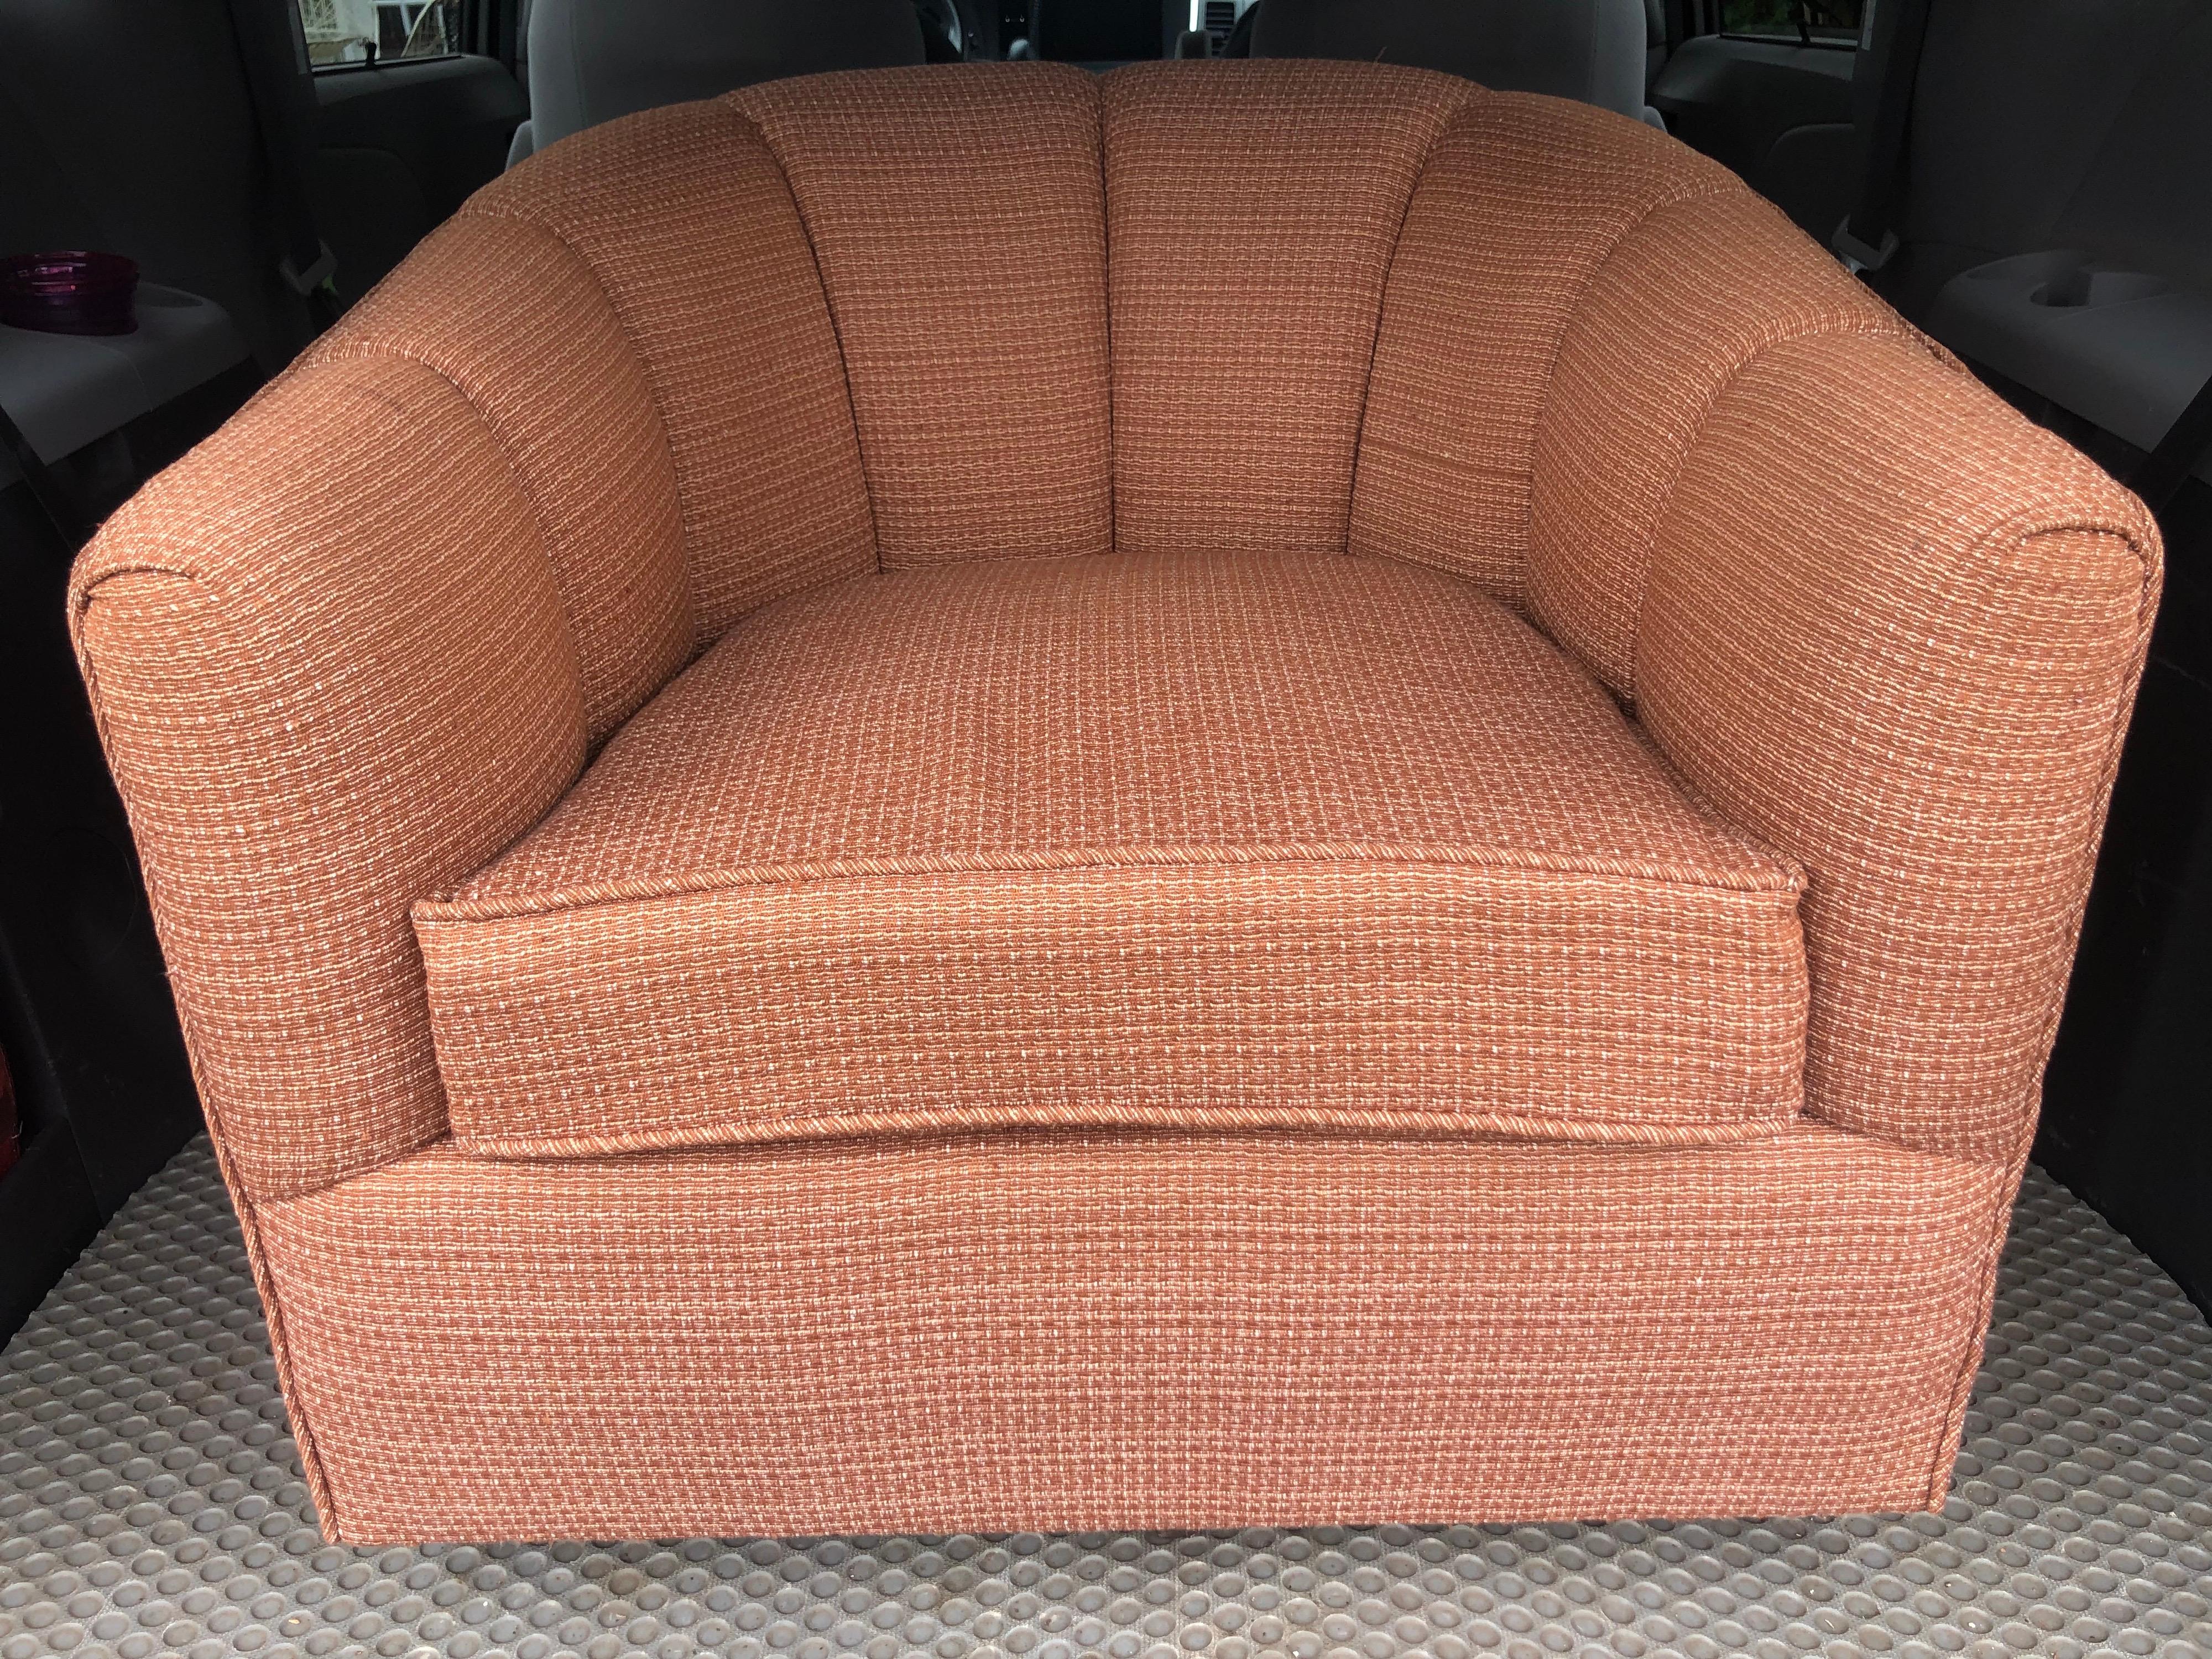 Mid Century Swivel club chair. Coral rust tone with a nice textural weave. Classic cube shape and so 